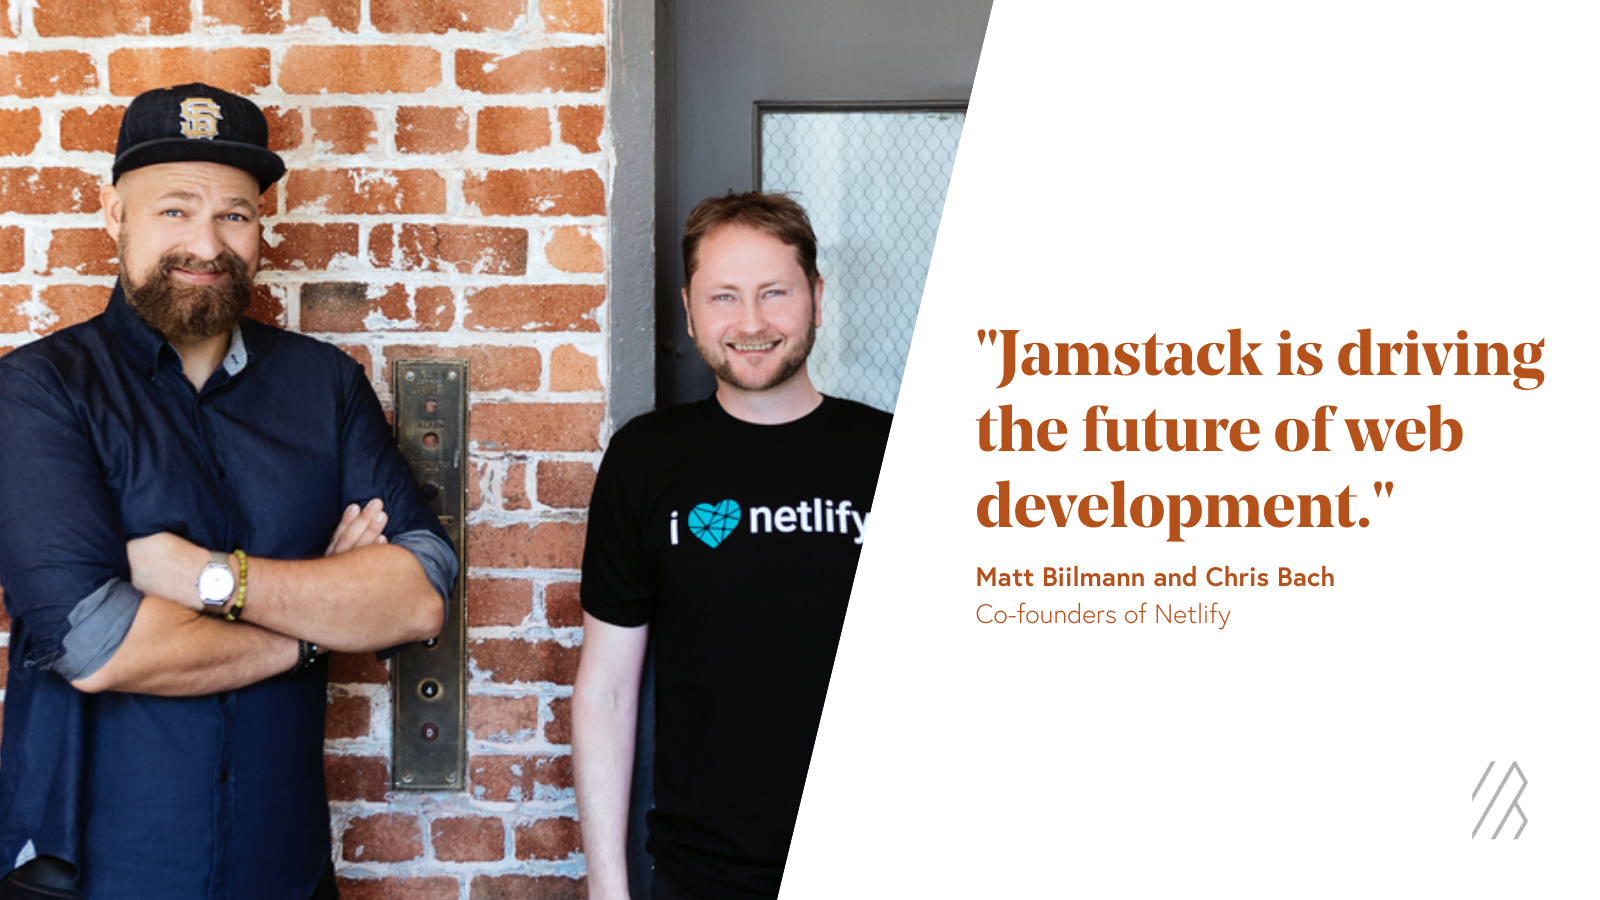 Co-founders of Netlify: Jamstack is drivng the future of web development. 